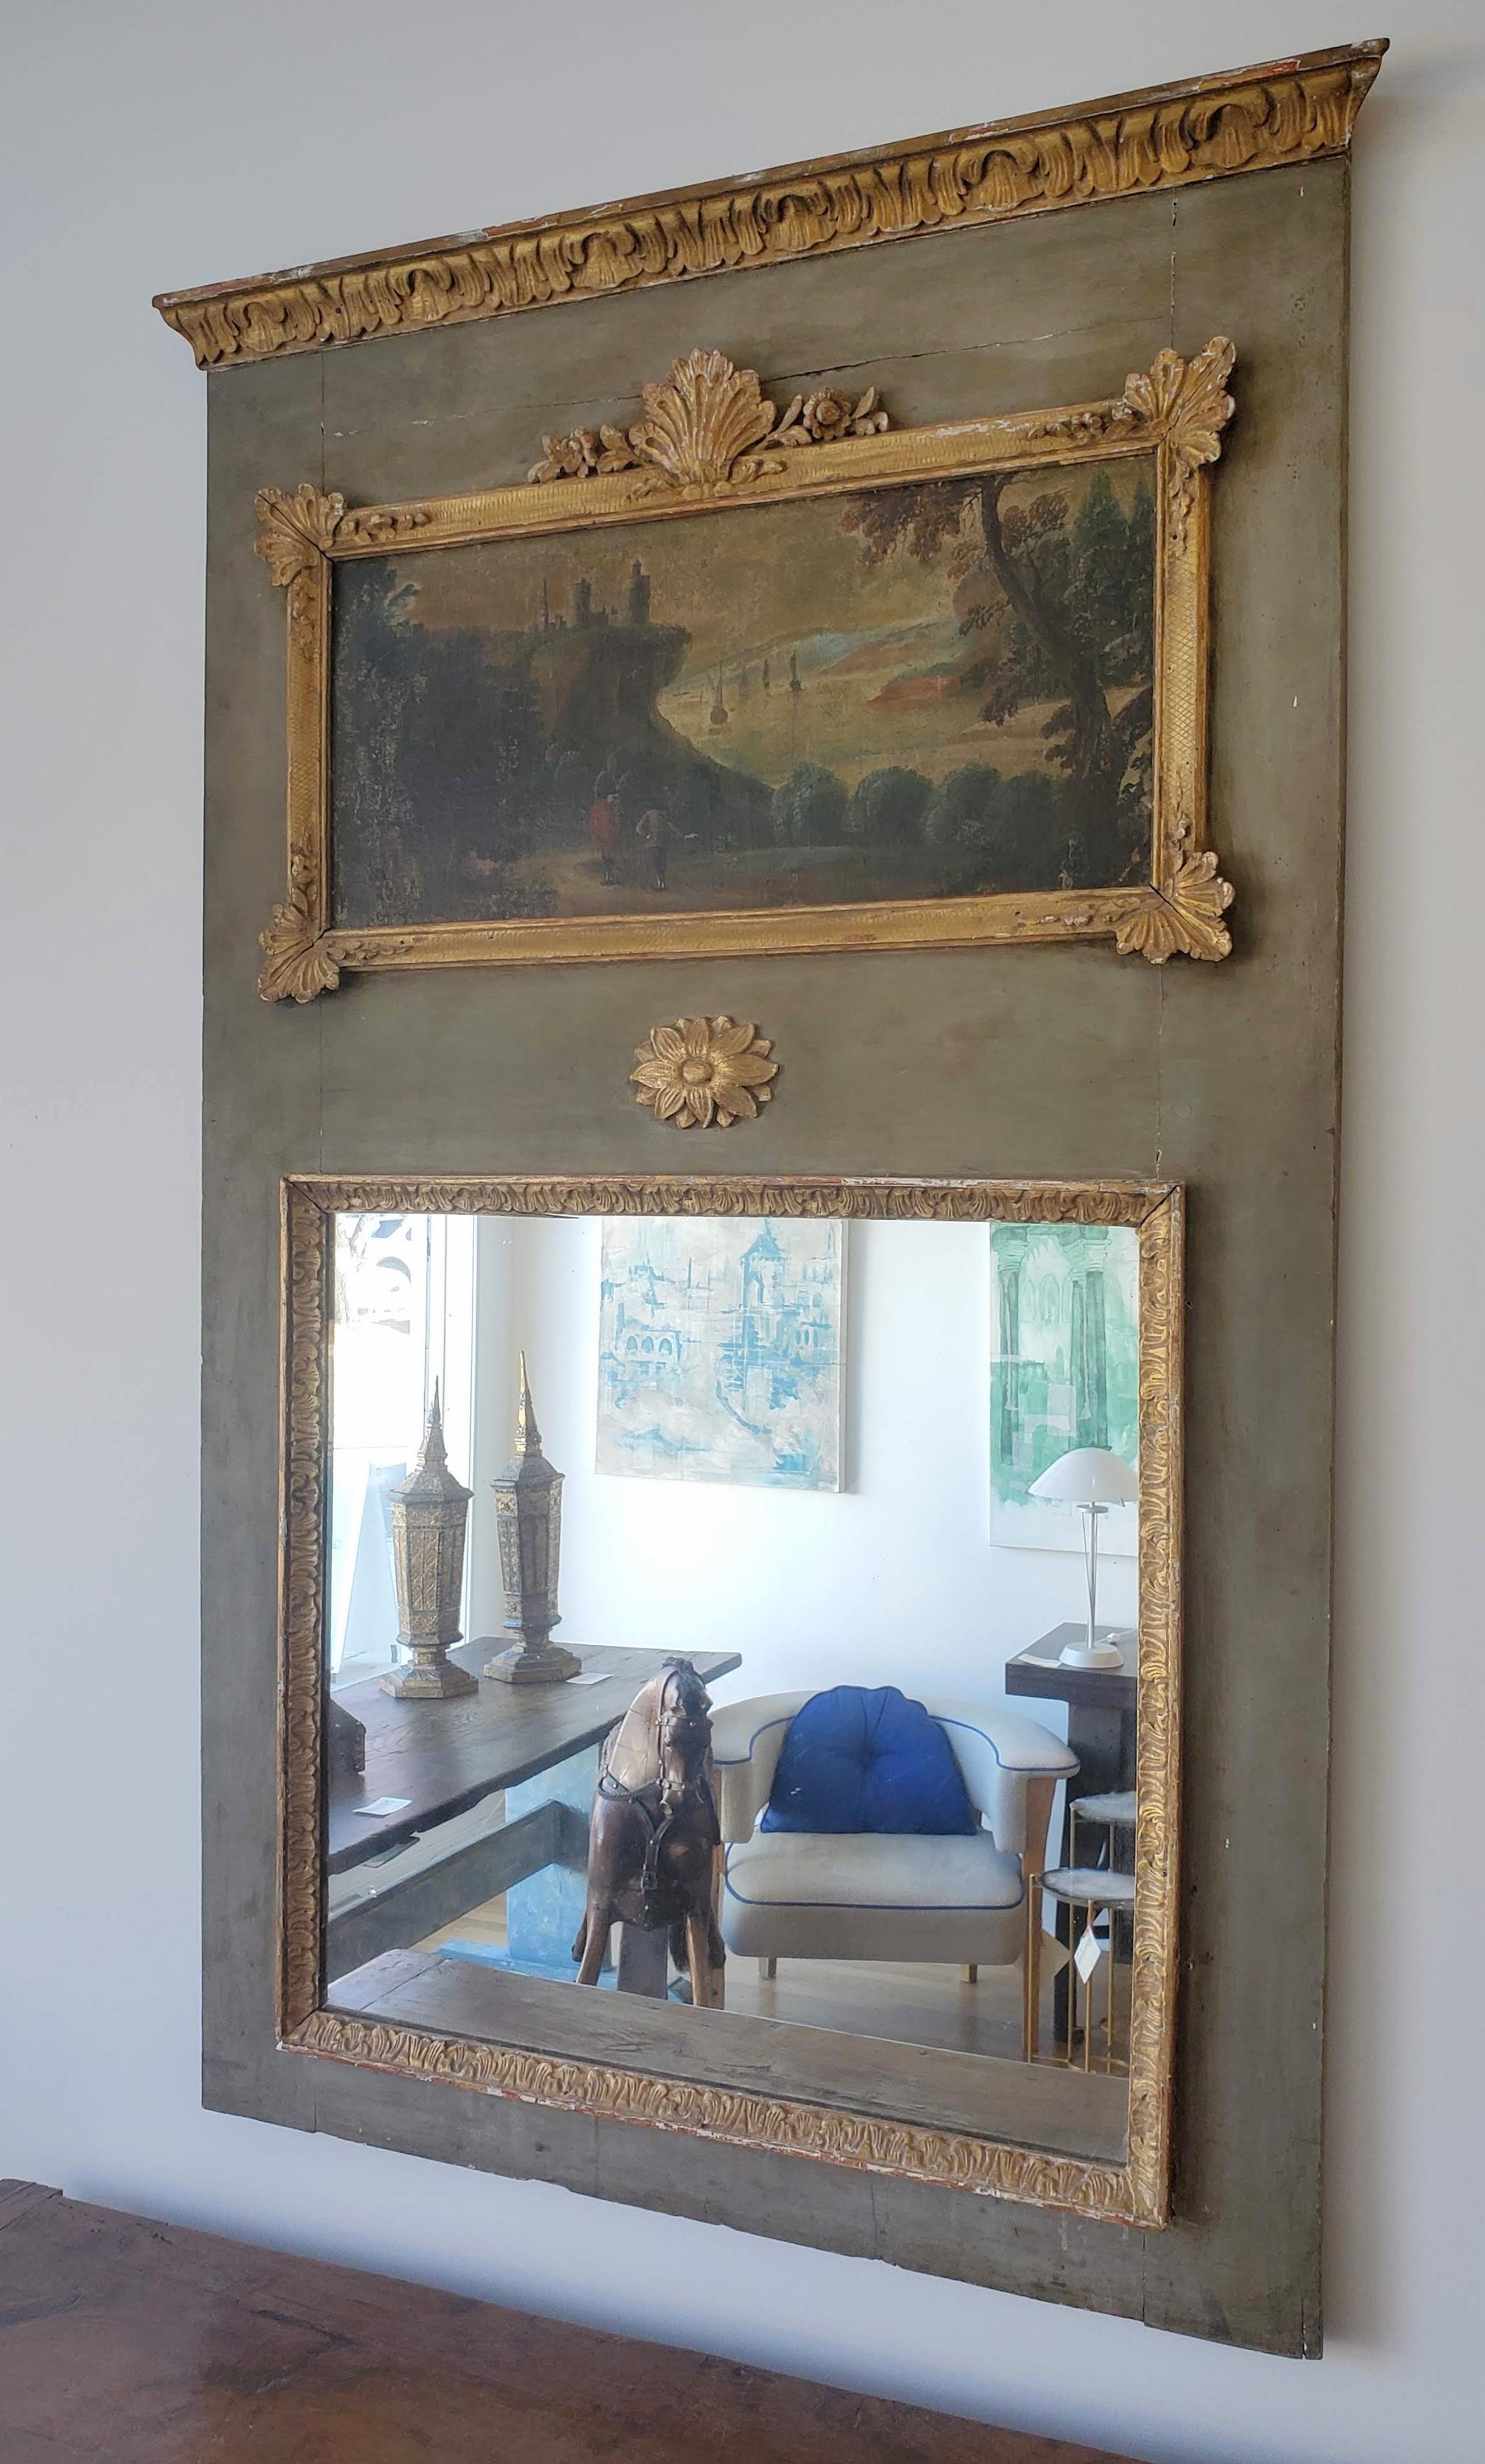 18th Century French Provincial Louis XVI Period Trumeau mirror. Finely carved and molded decoration retaining the original gilding and green painted finish. Central mirror with oil painting above depicting coastal scene with ships and ancient ruins.